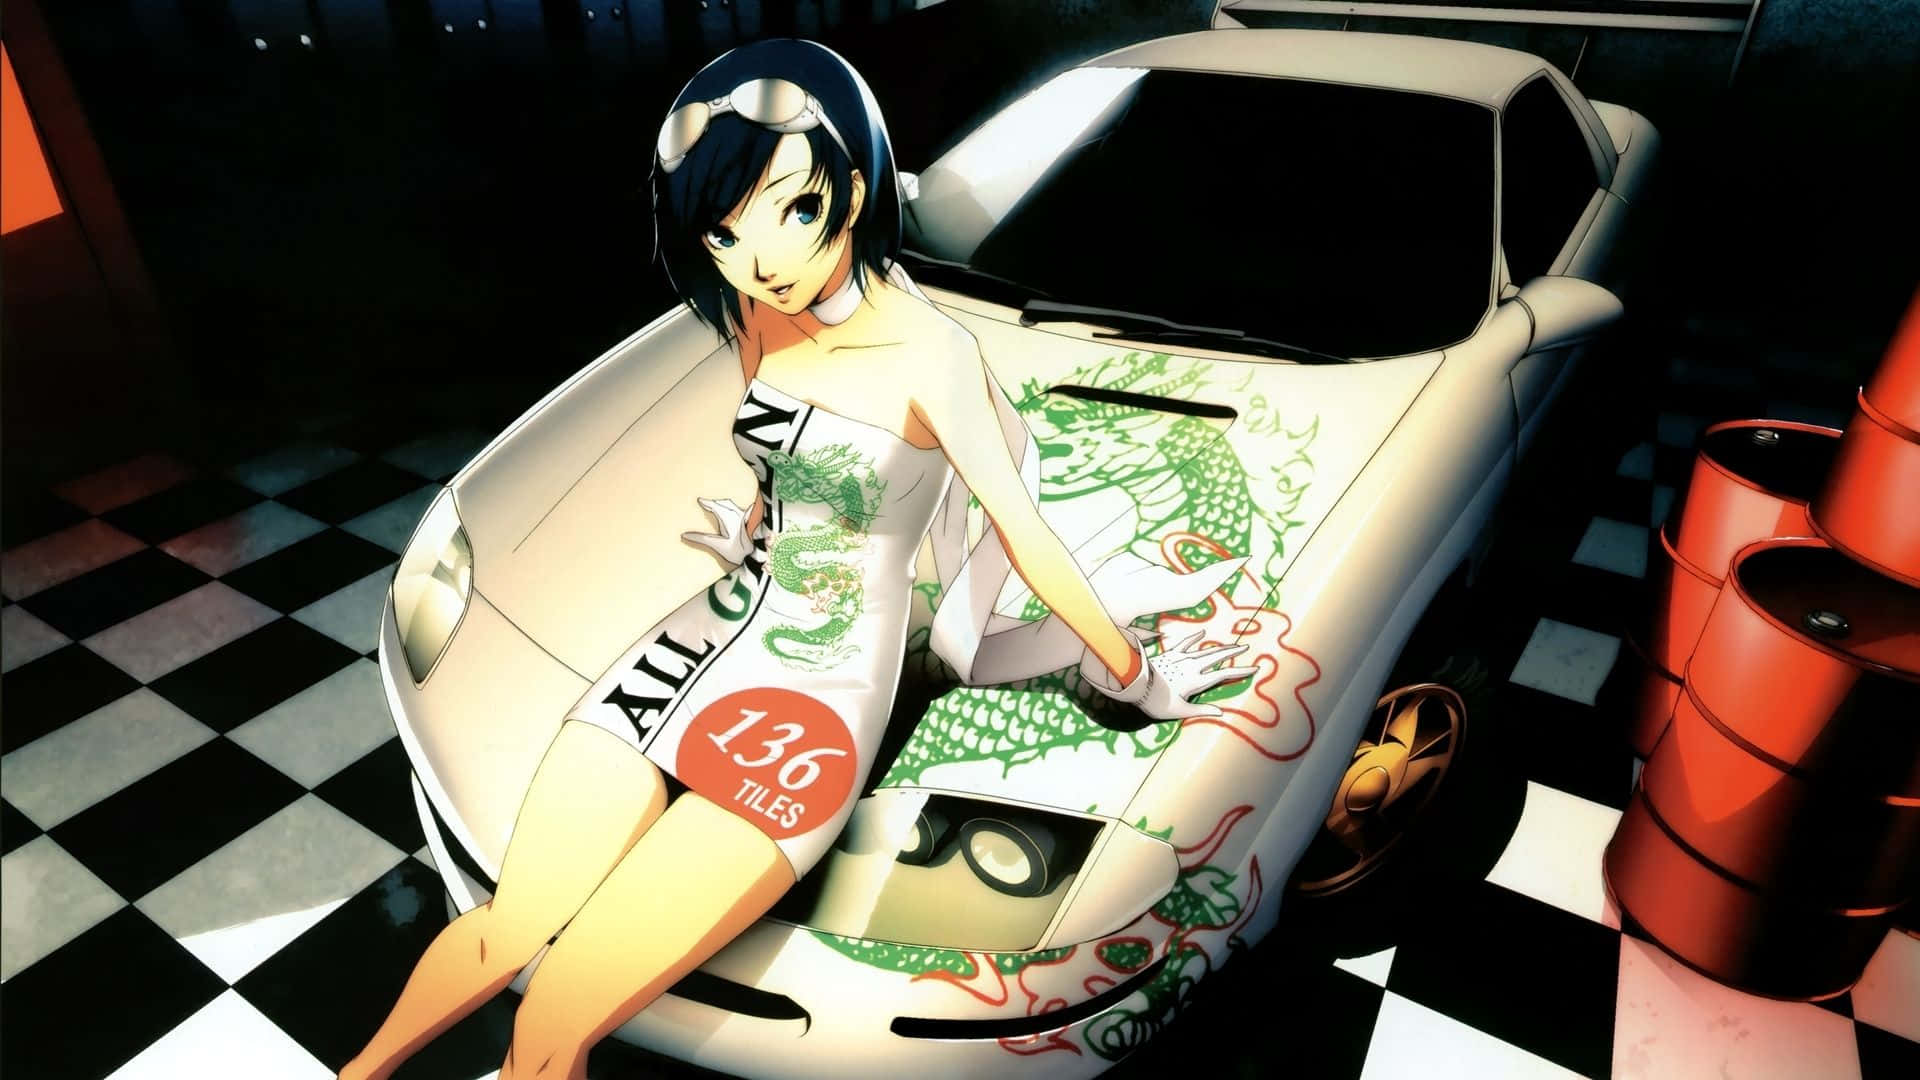 A Girl In A White Dress Is Posing Next To A White Sports Car